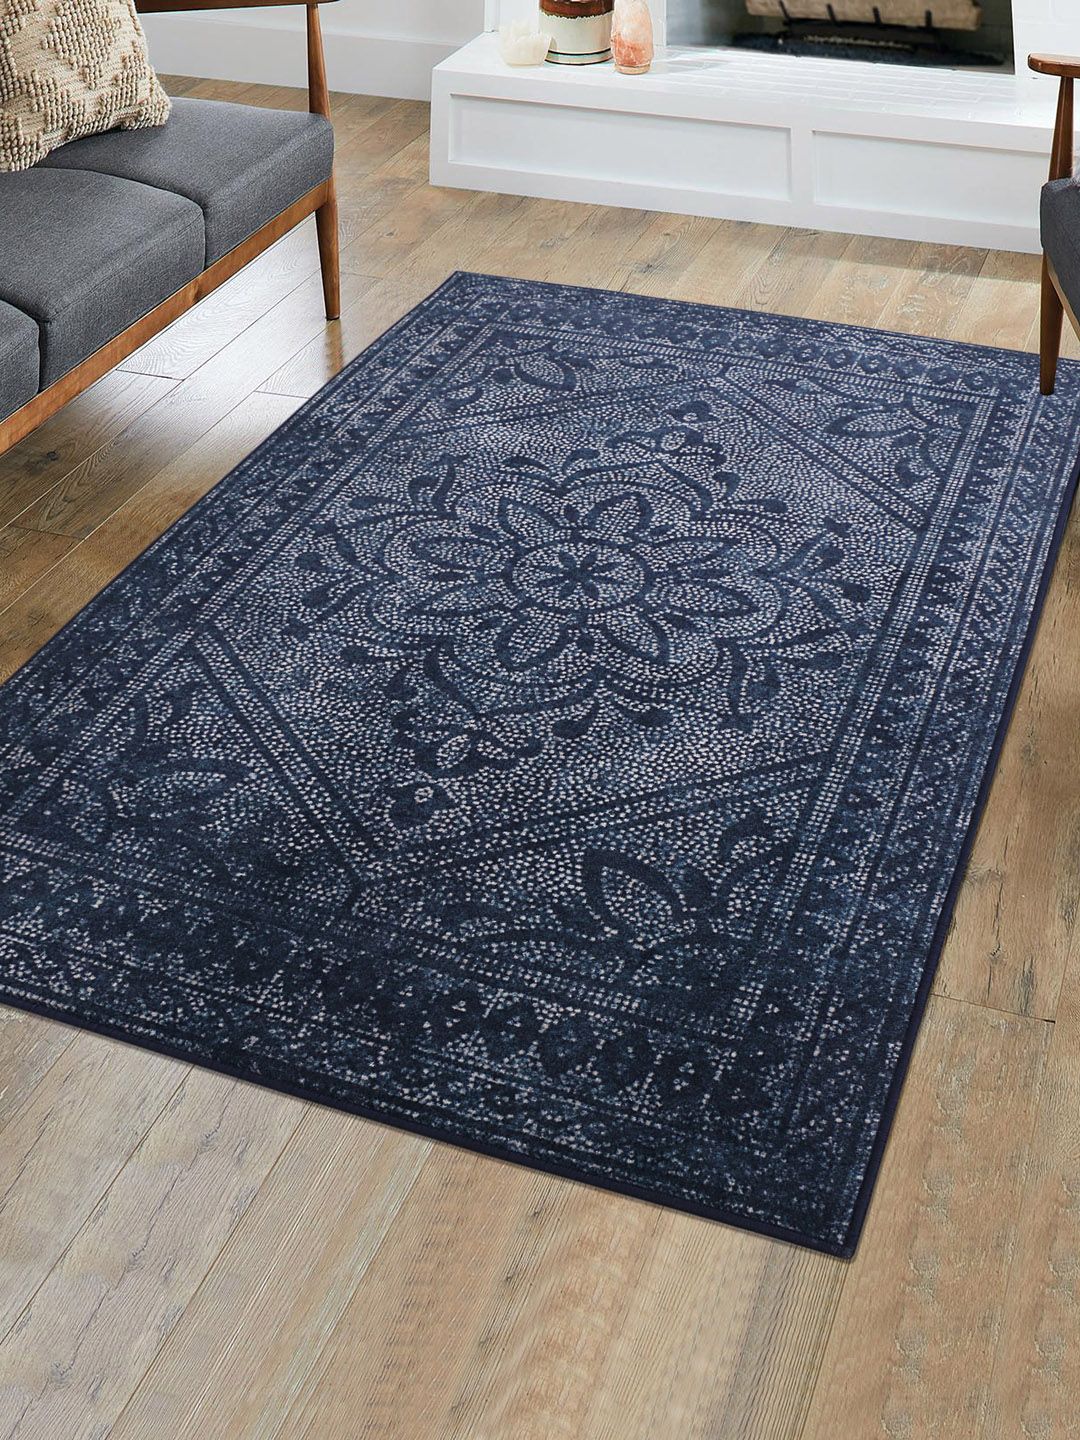 RUGSMITH Navy Blue Patterned Anti-Skid Rectangle Carpet Price in India